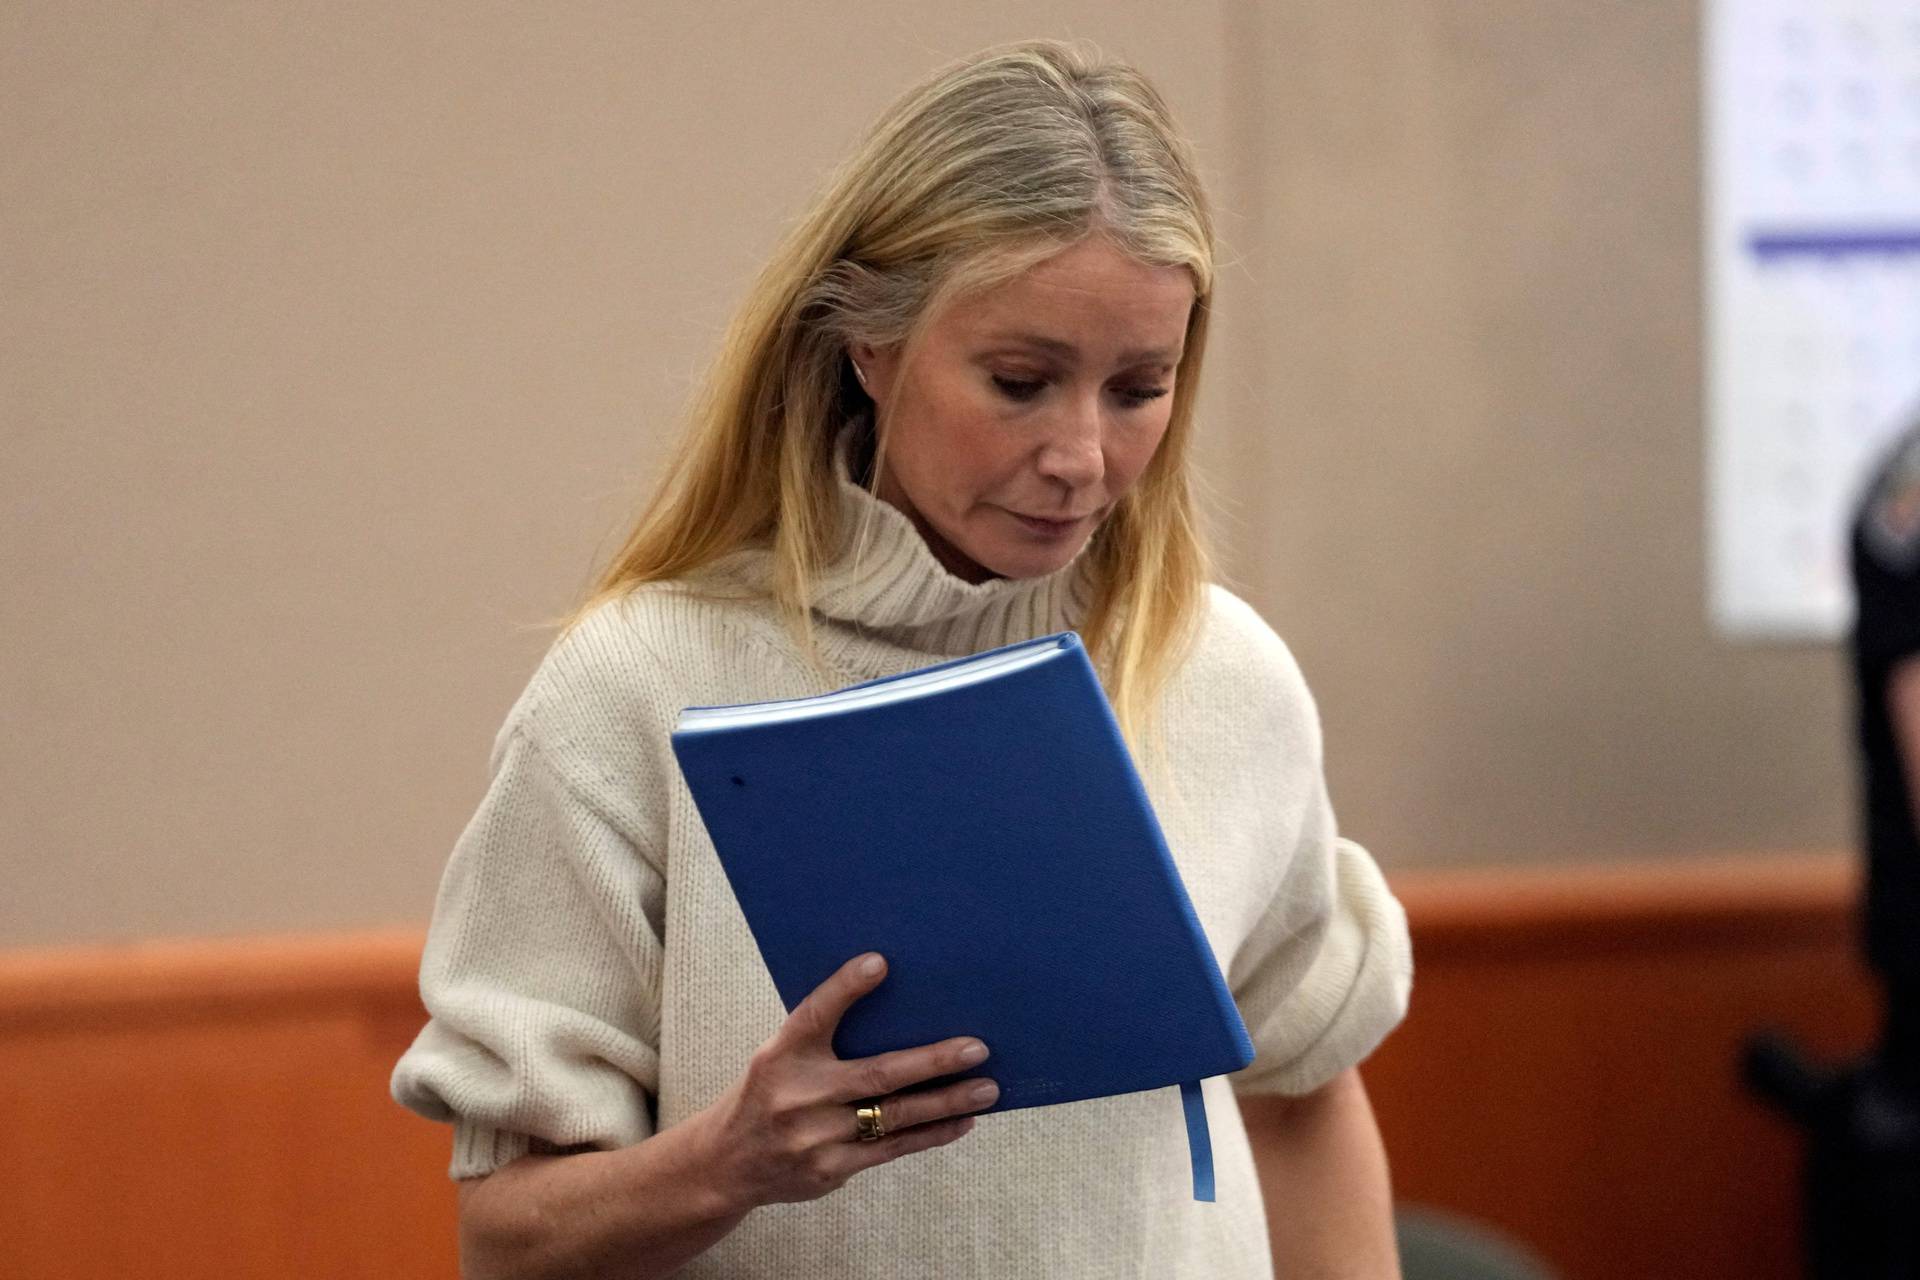 Actor Gwyneth Paltrow leaves a courtroom in Park City, Utah